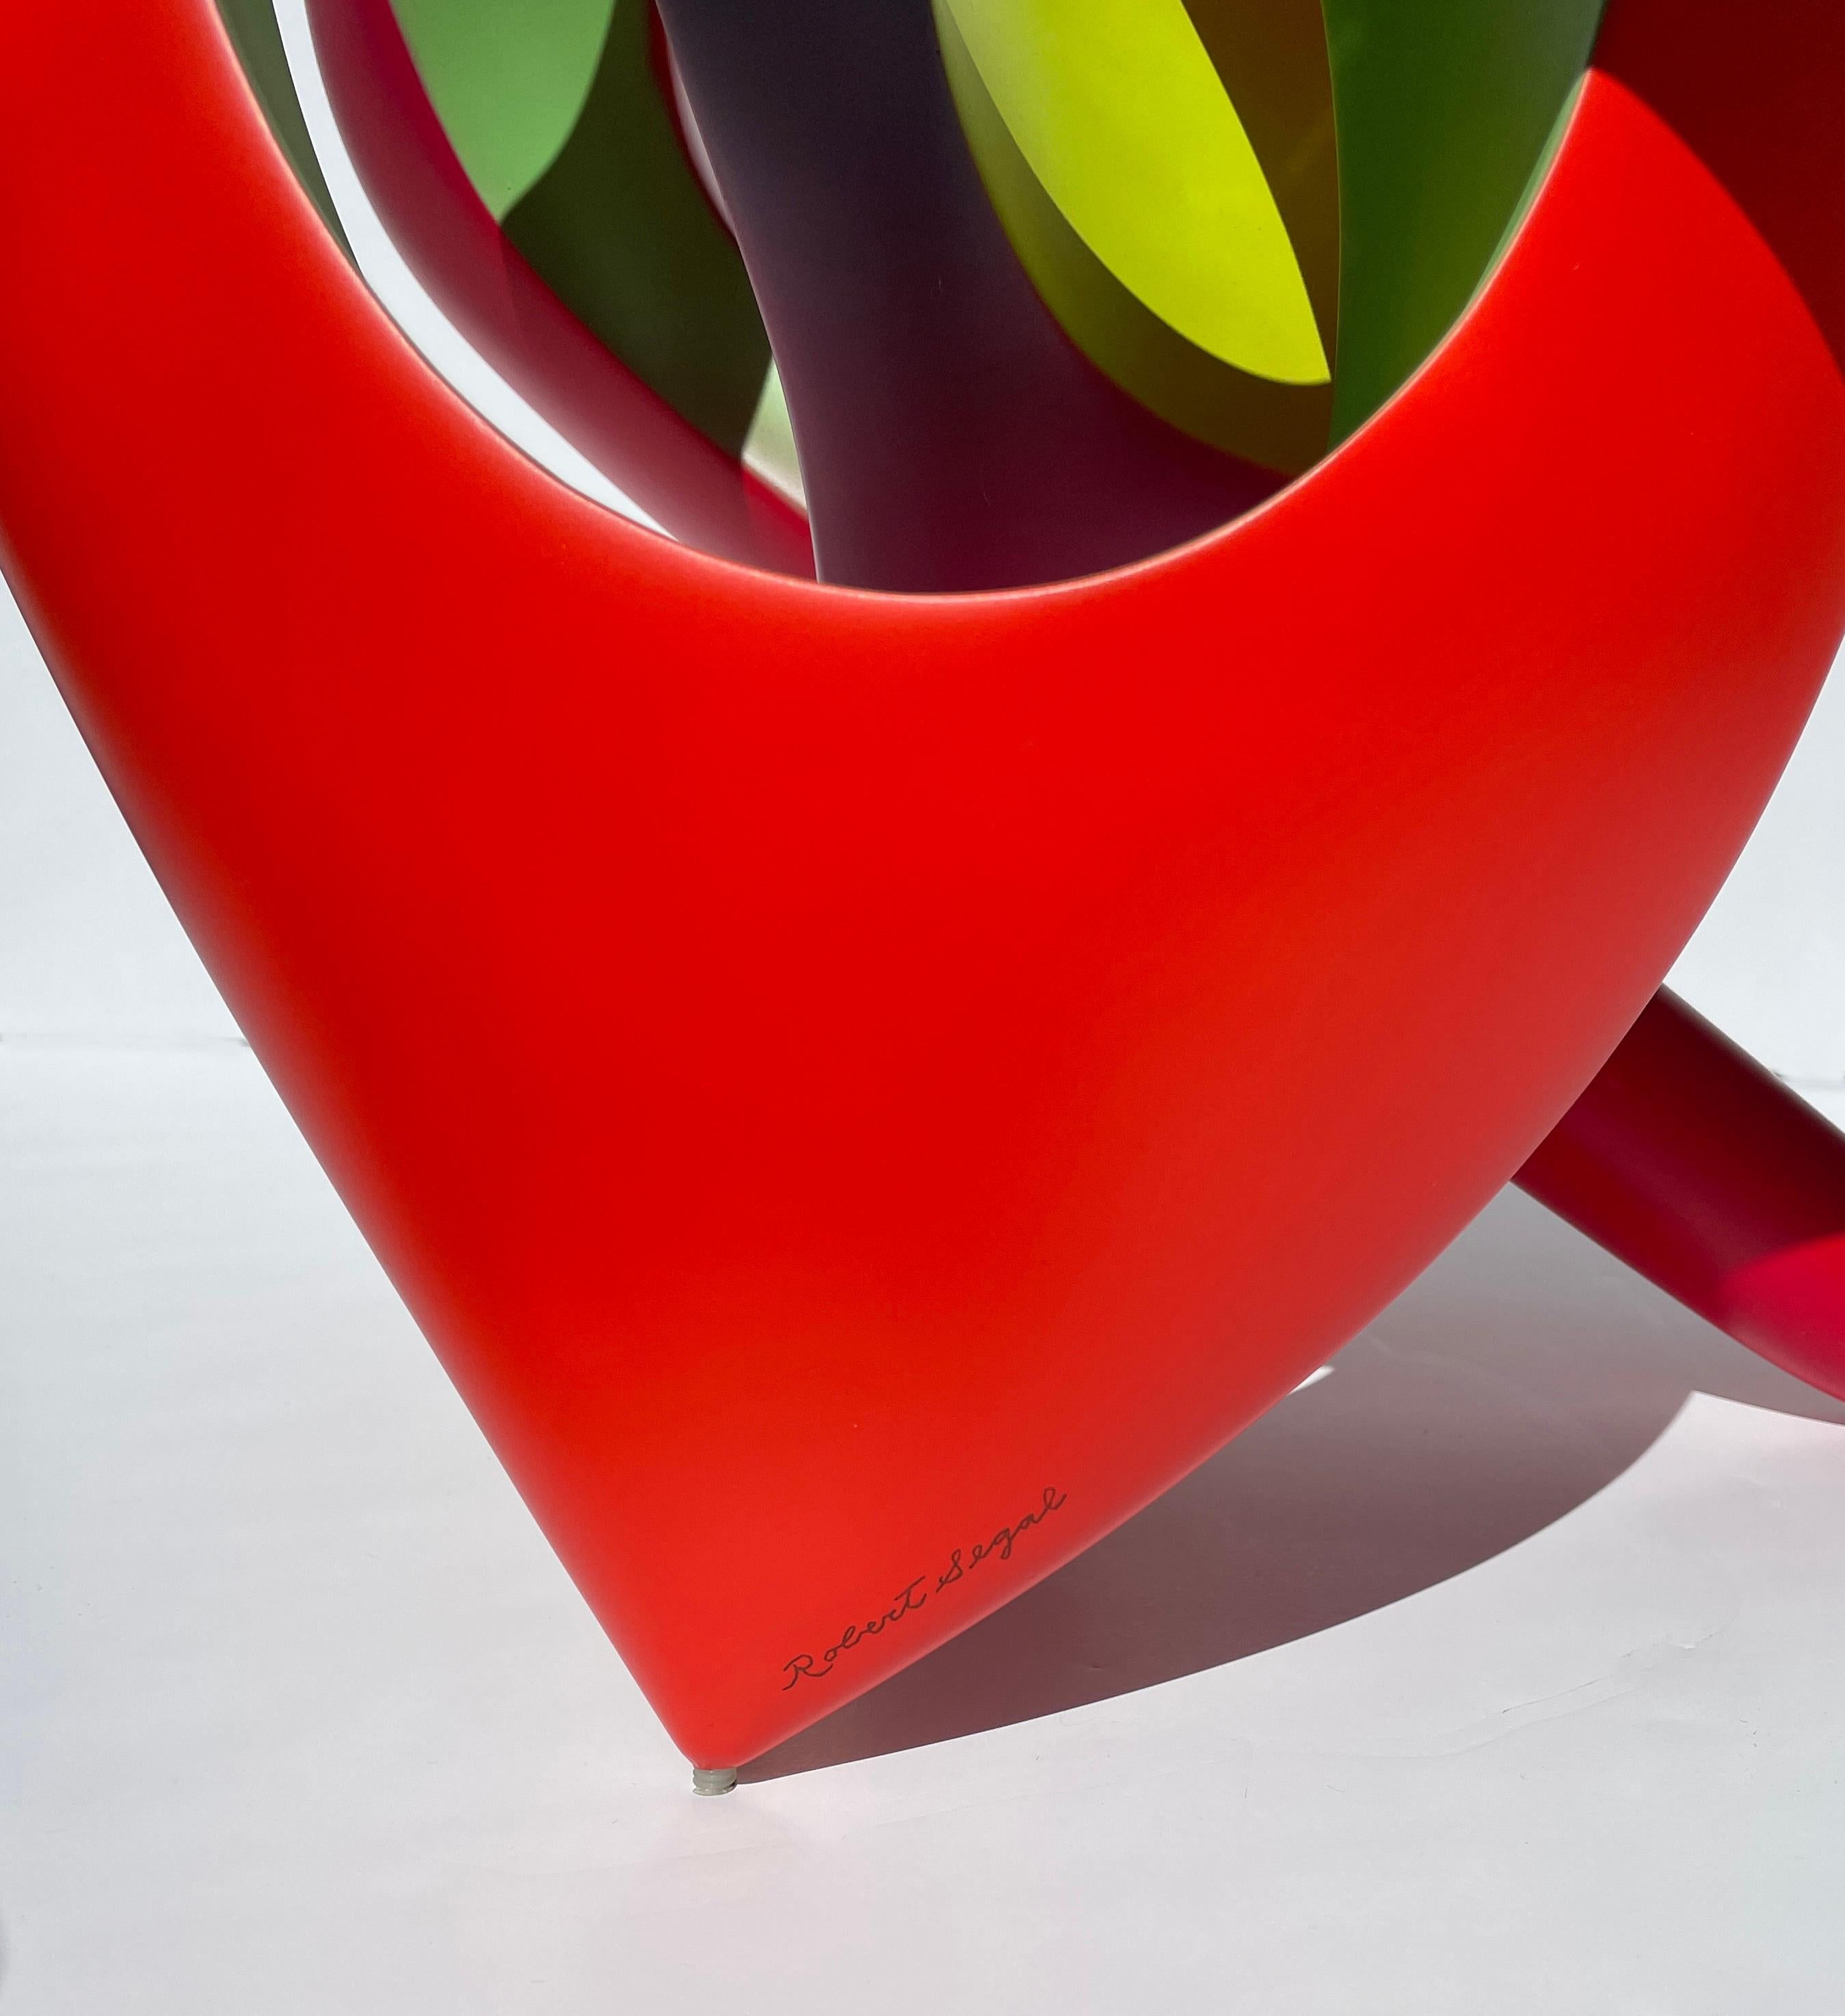 Helical Passage, Abstract Sculpture Brightly Colored Geometric Interlocking Form 6